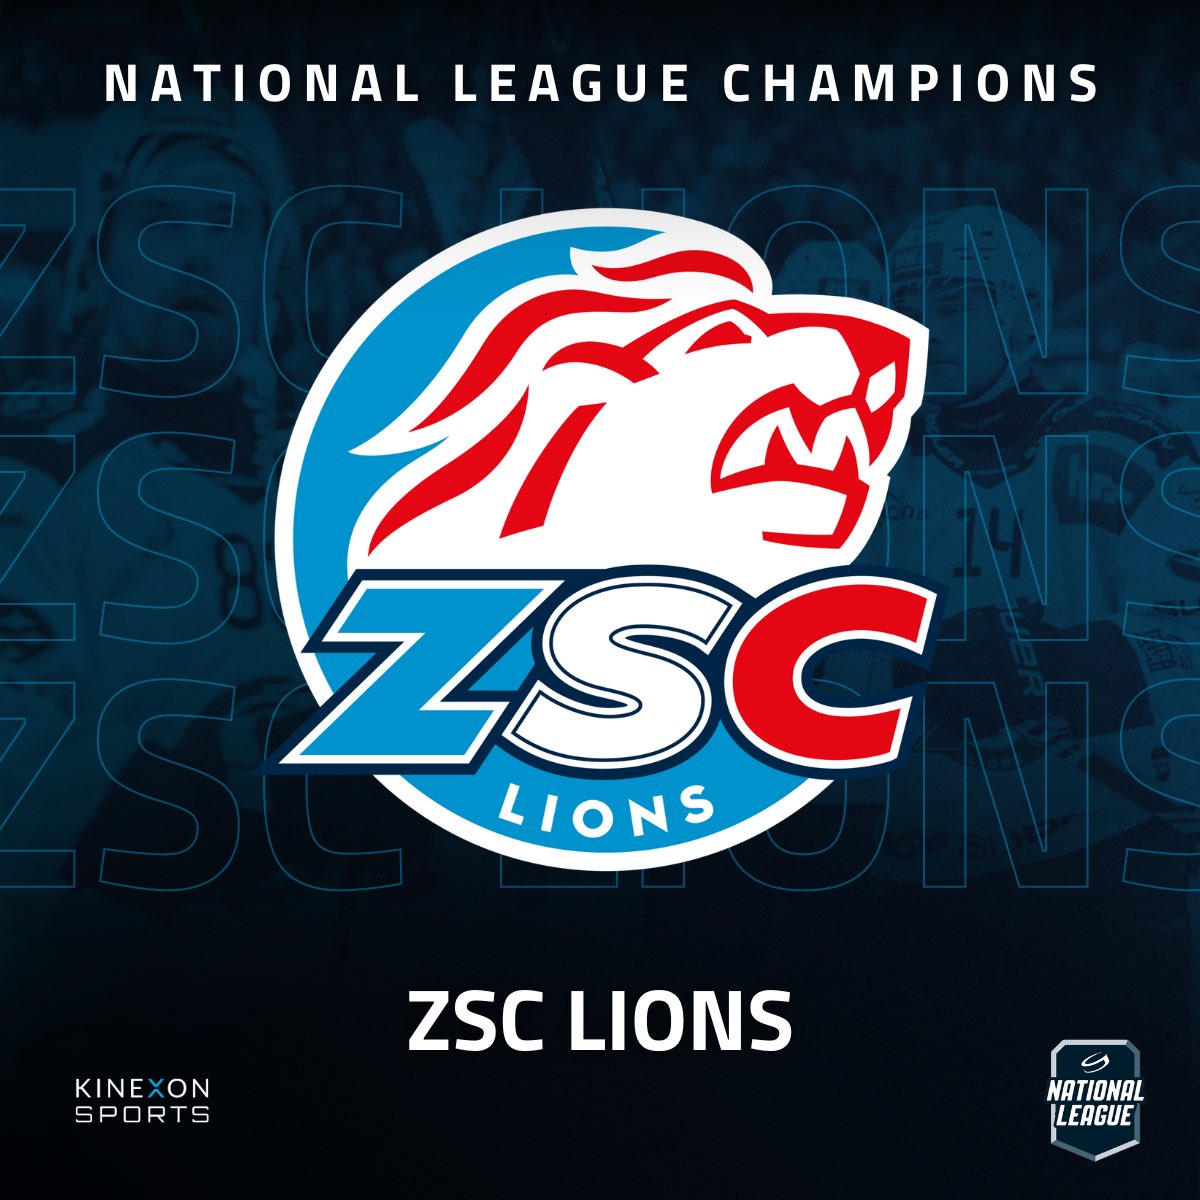 Congratulations @zsclions on winning the Swiss National League Finals! 🦁🏆 We are proud of our two customers in the final, ZSC Lions and Lausanne HC, who competed their hearts out in yet another all-KINEXON championship. #InnovateTheGame #wearabletech #sportsdata #ZSCLHC